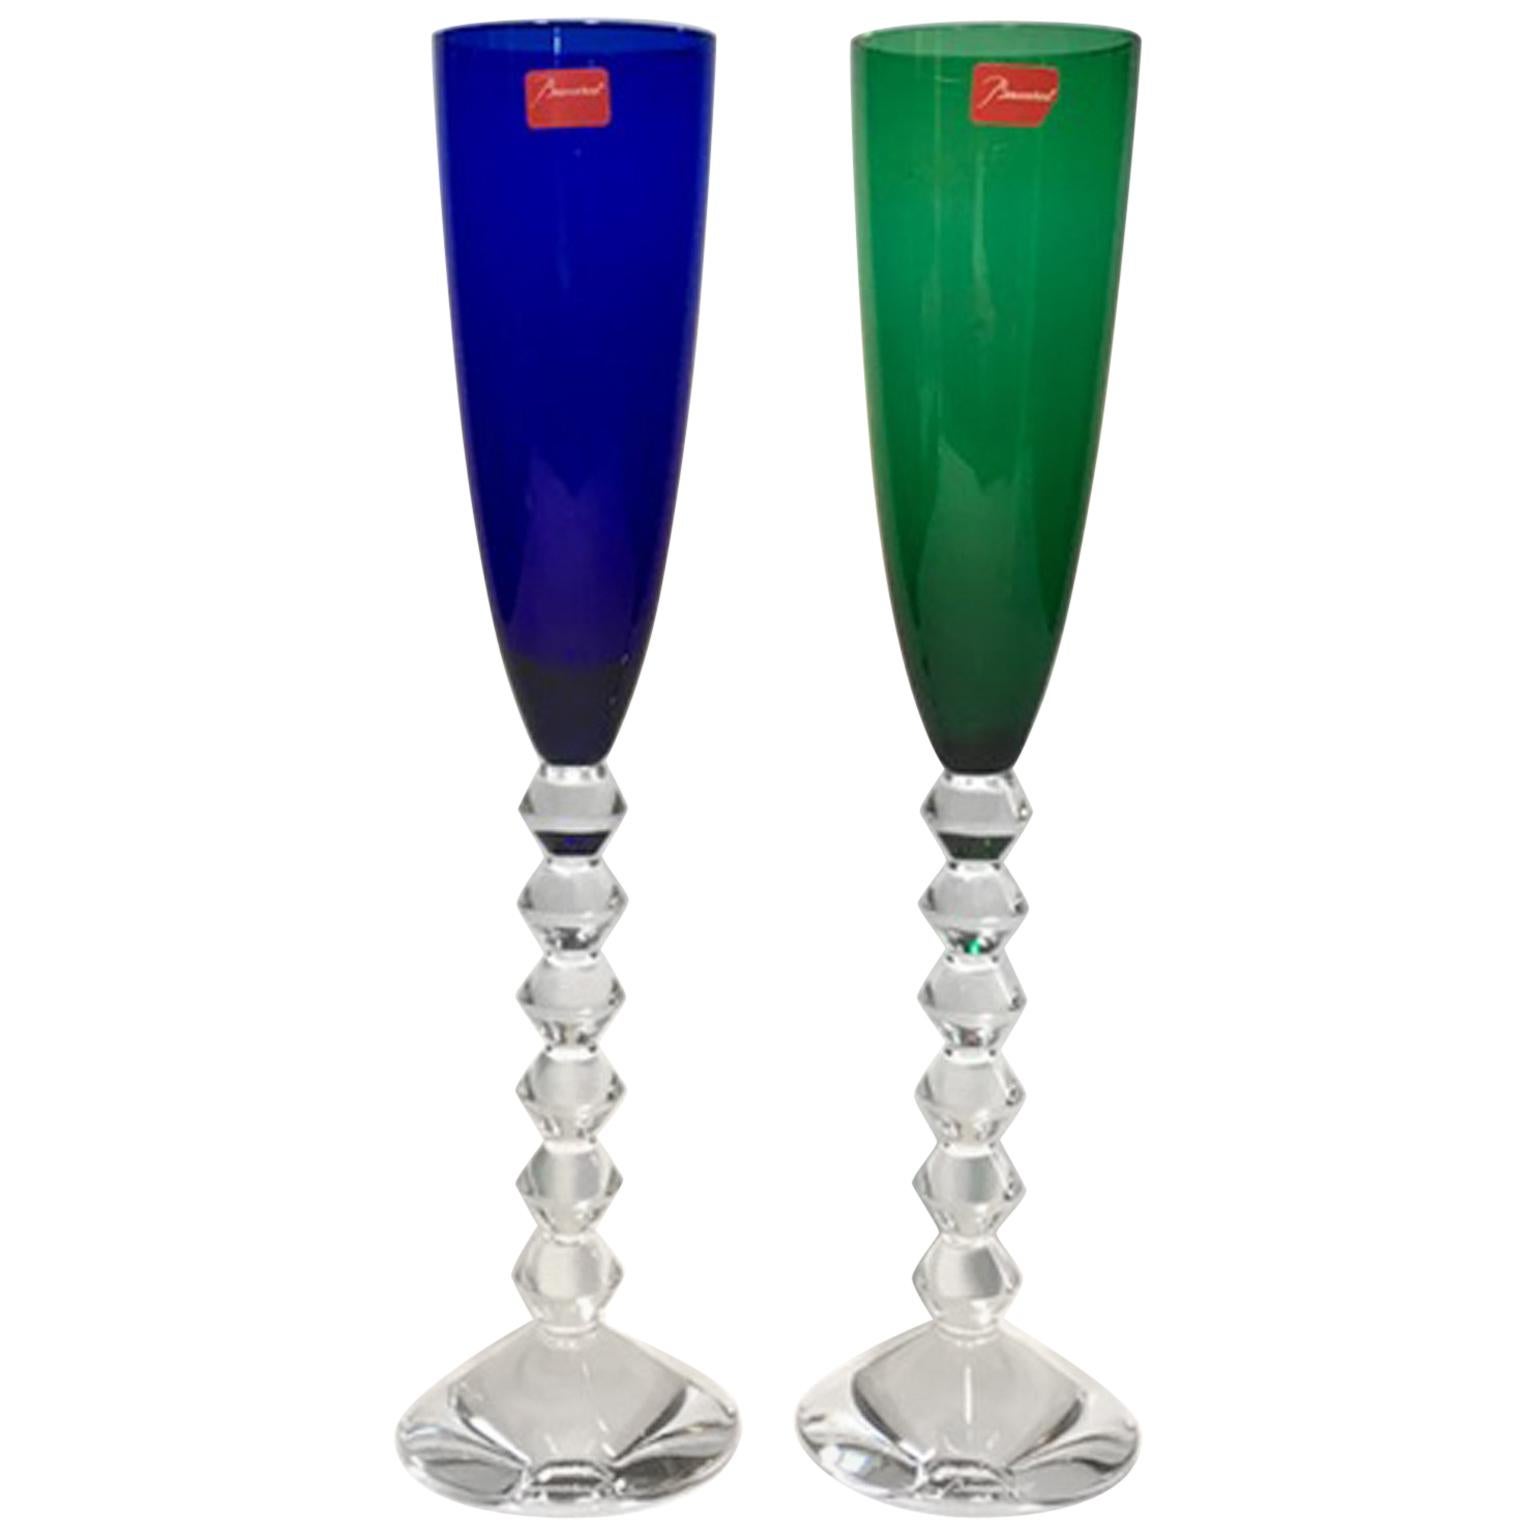 Set of Two Baccarat Green and Blue Crystal Goblets Glasses France, 21st Century